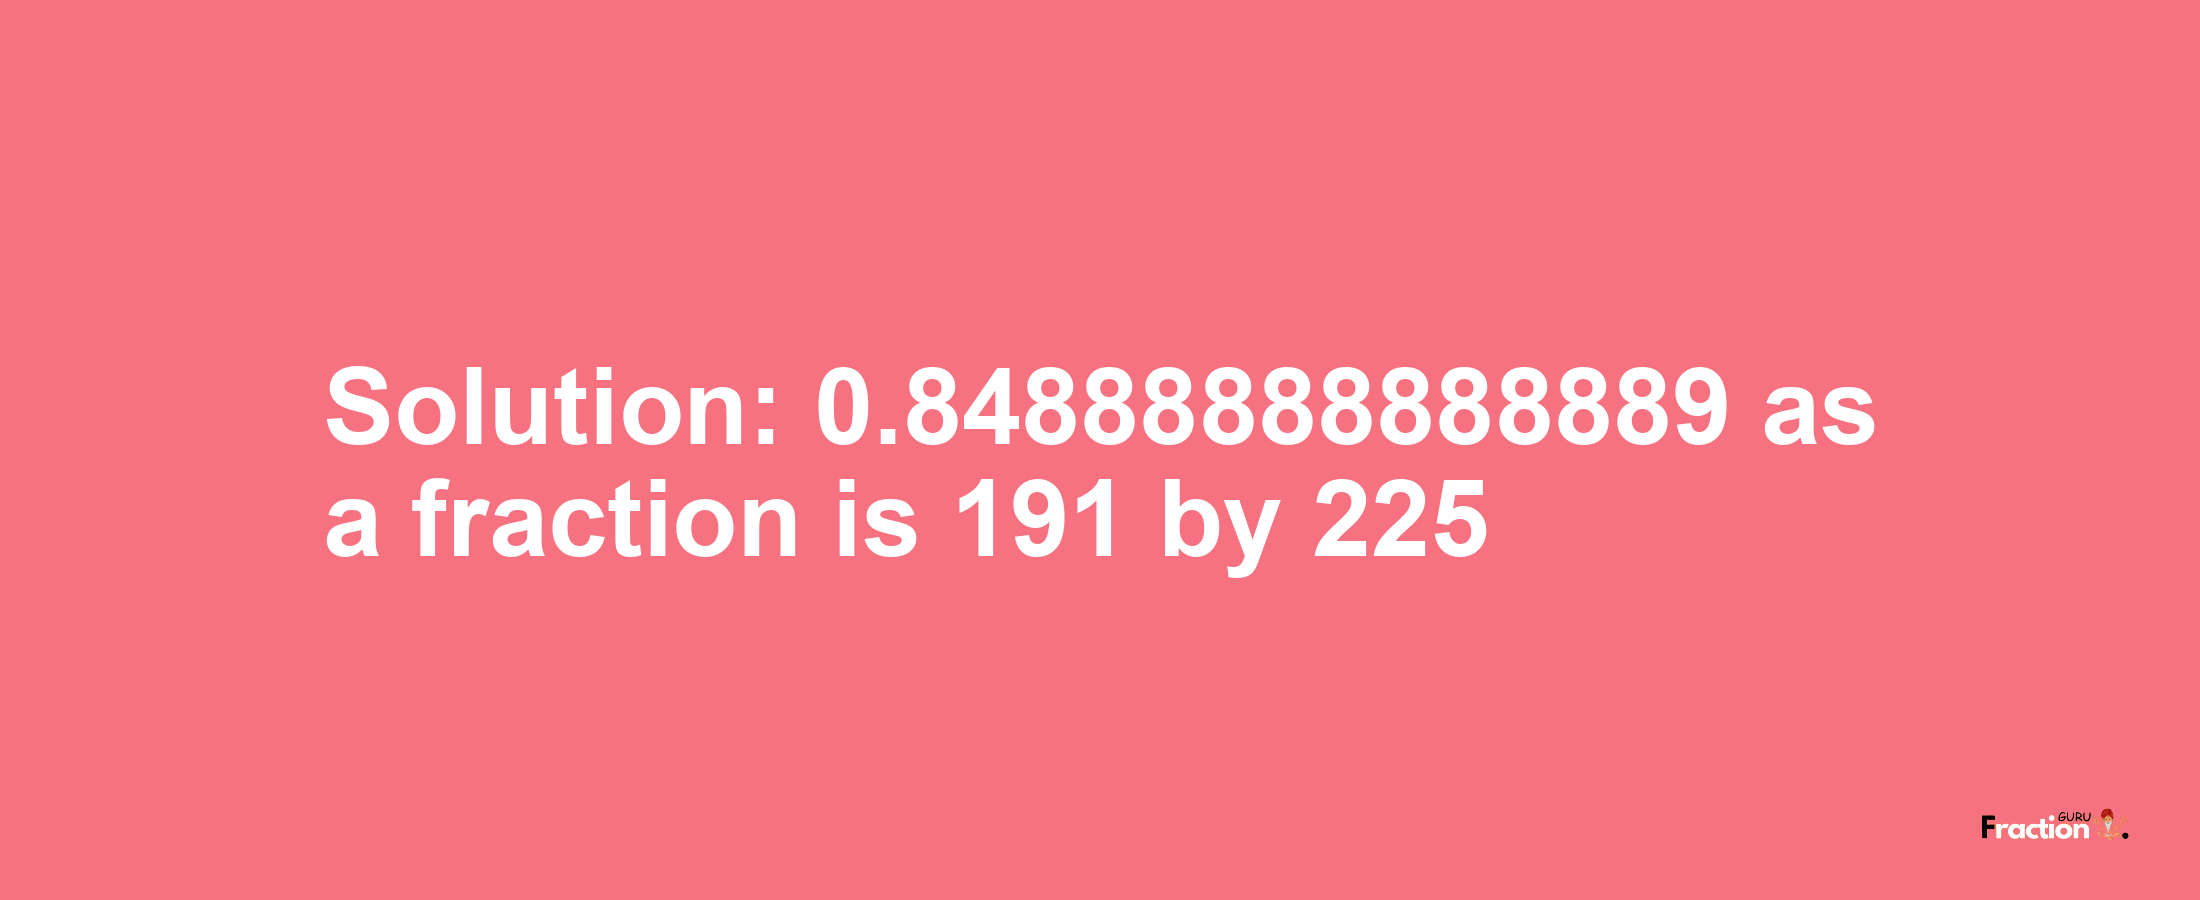 Solution:0.84888888888889 as a fraction is 191/225